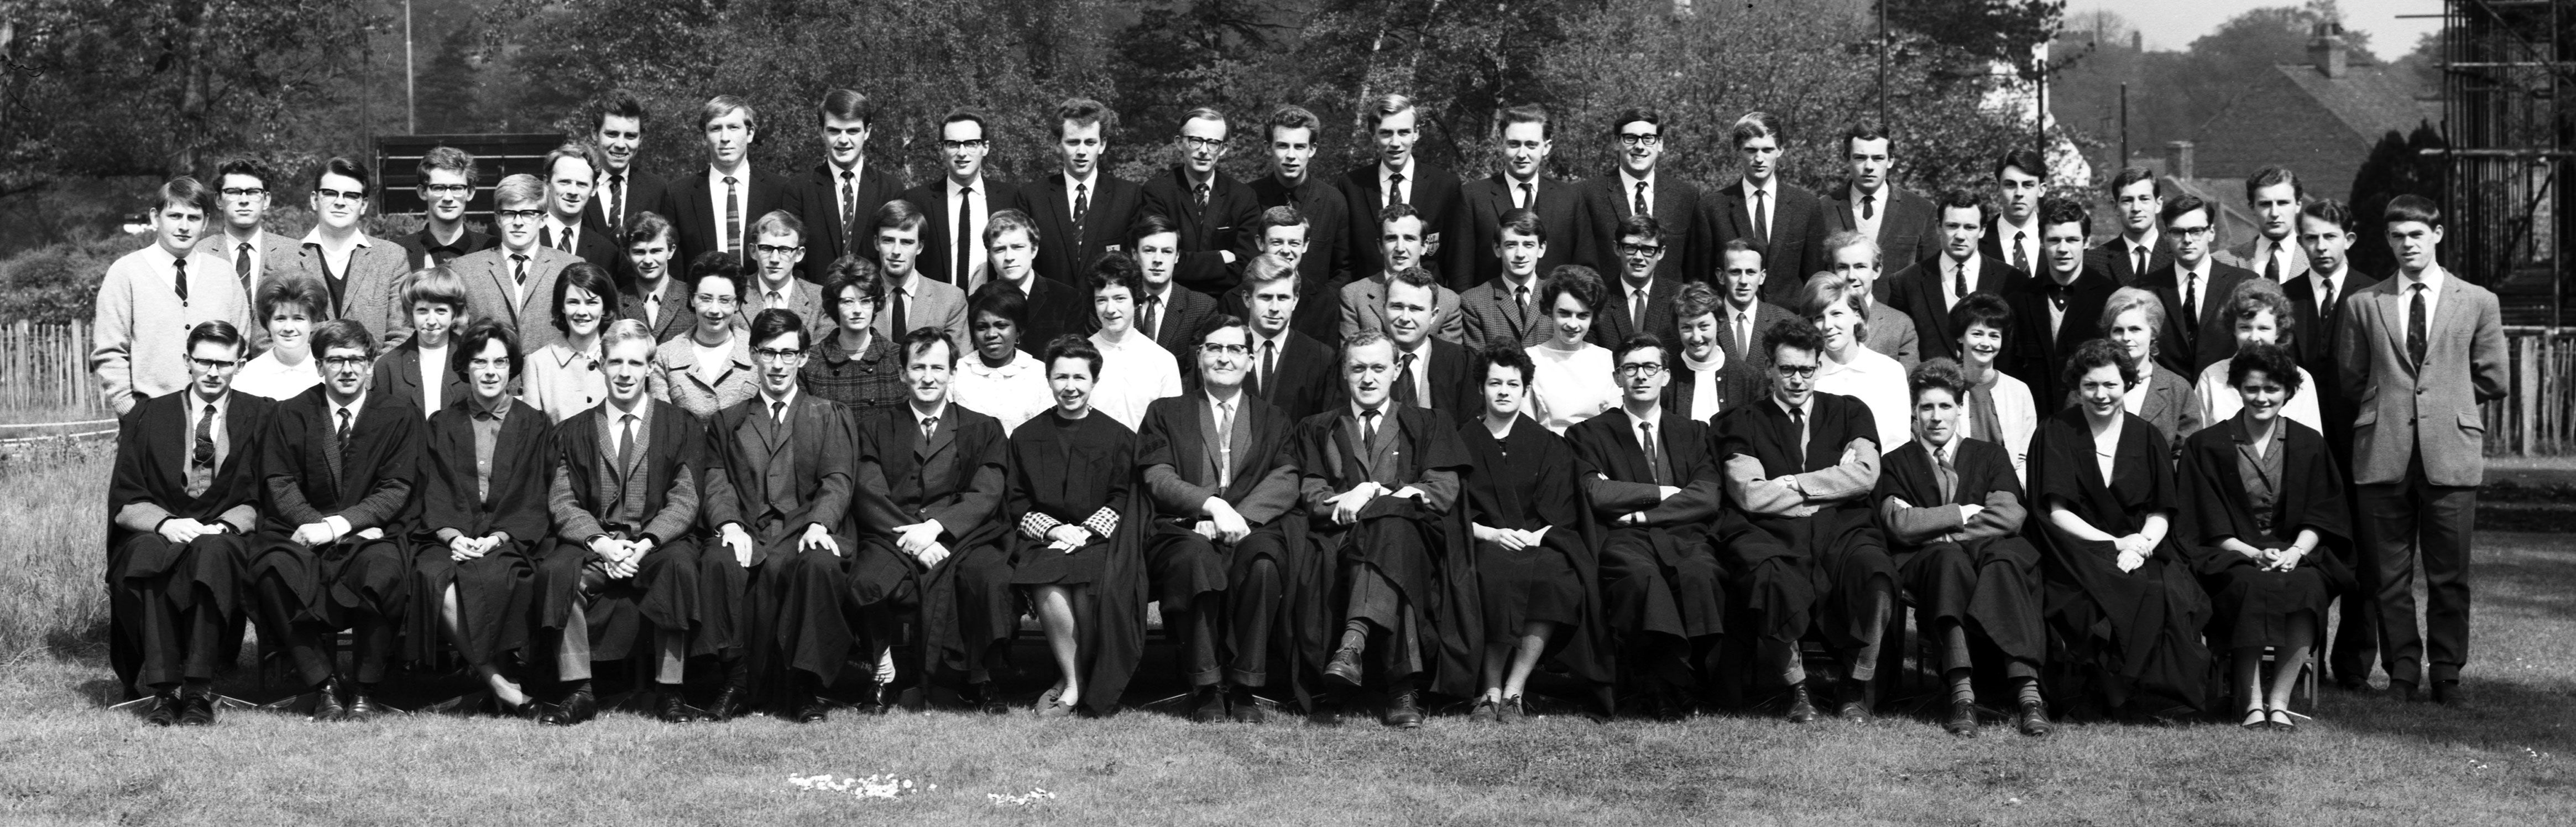 Geography Department Undergraduate Group photo from 1965